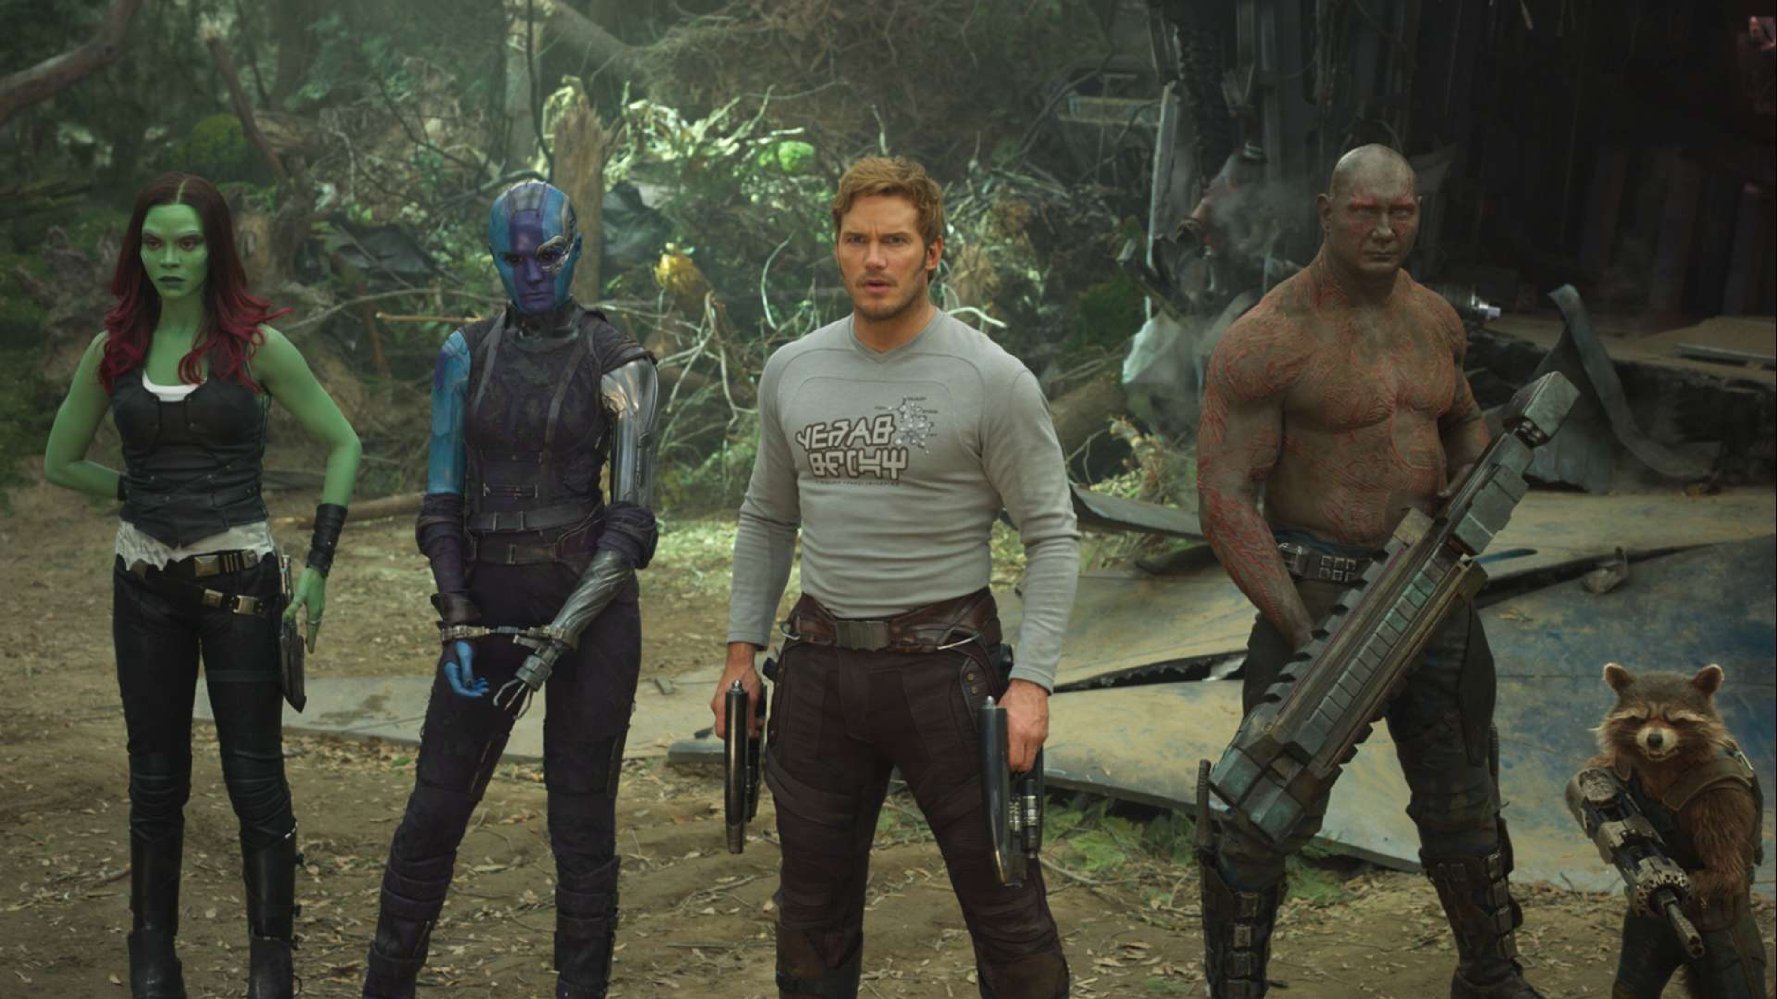 The Guardians of the Galaxy Vol. 2